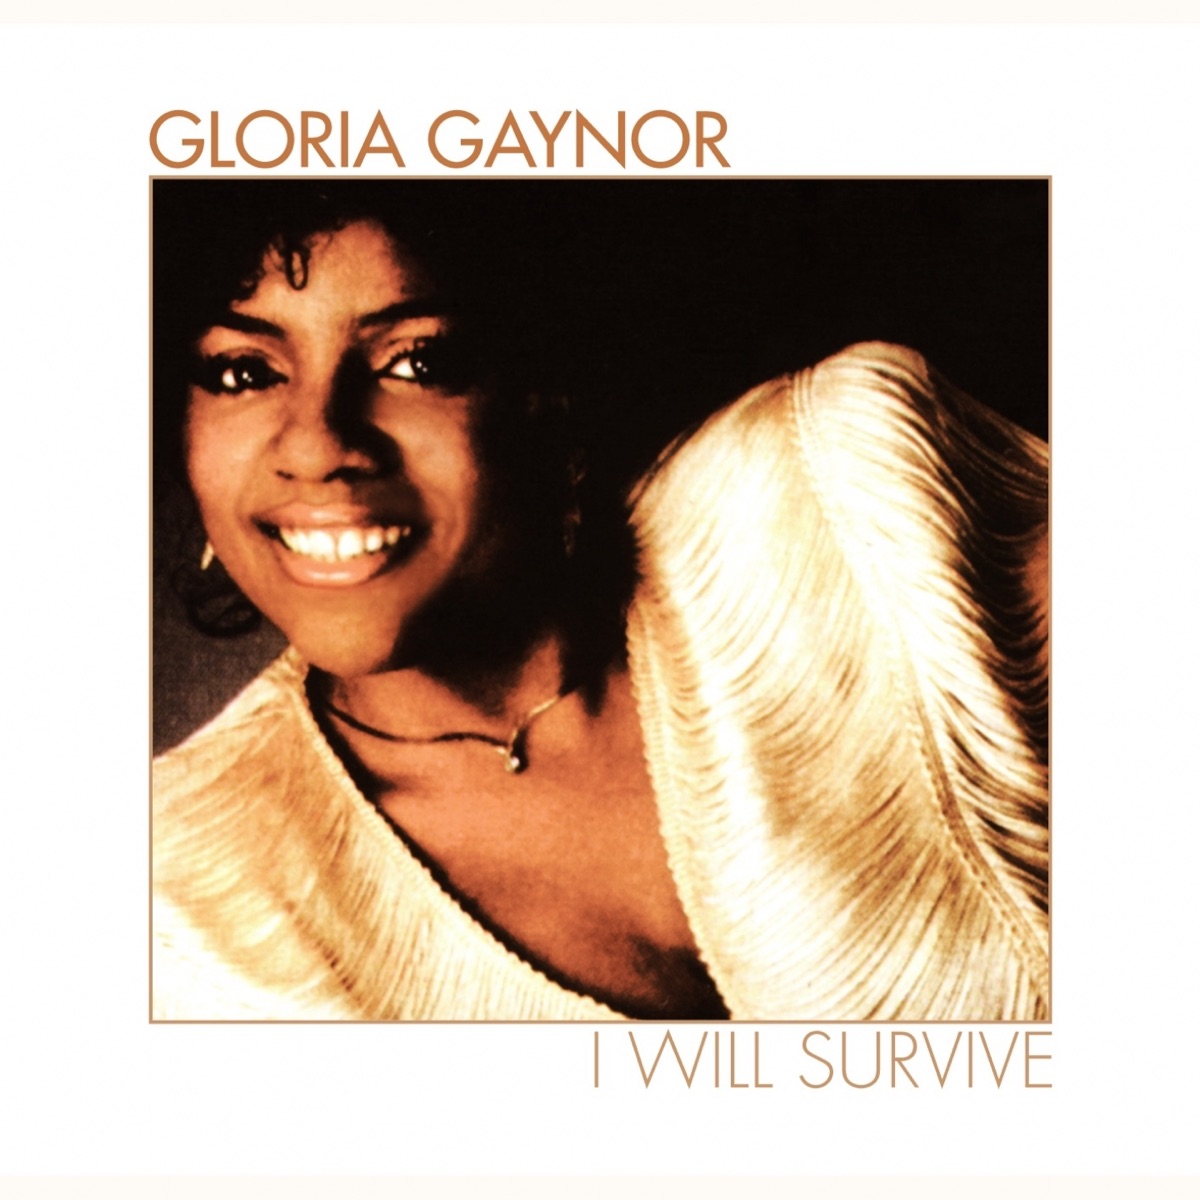 I Will Survive (Rerecorded) - Album by Gloria Gaynor - Apple Music